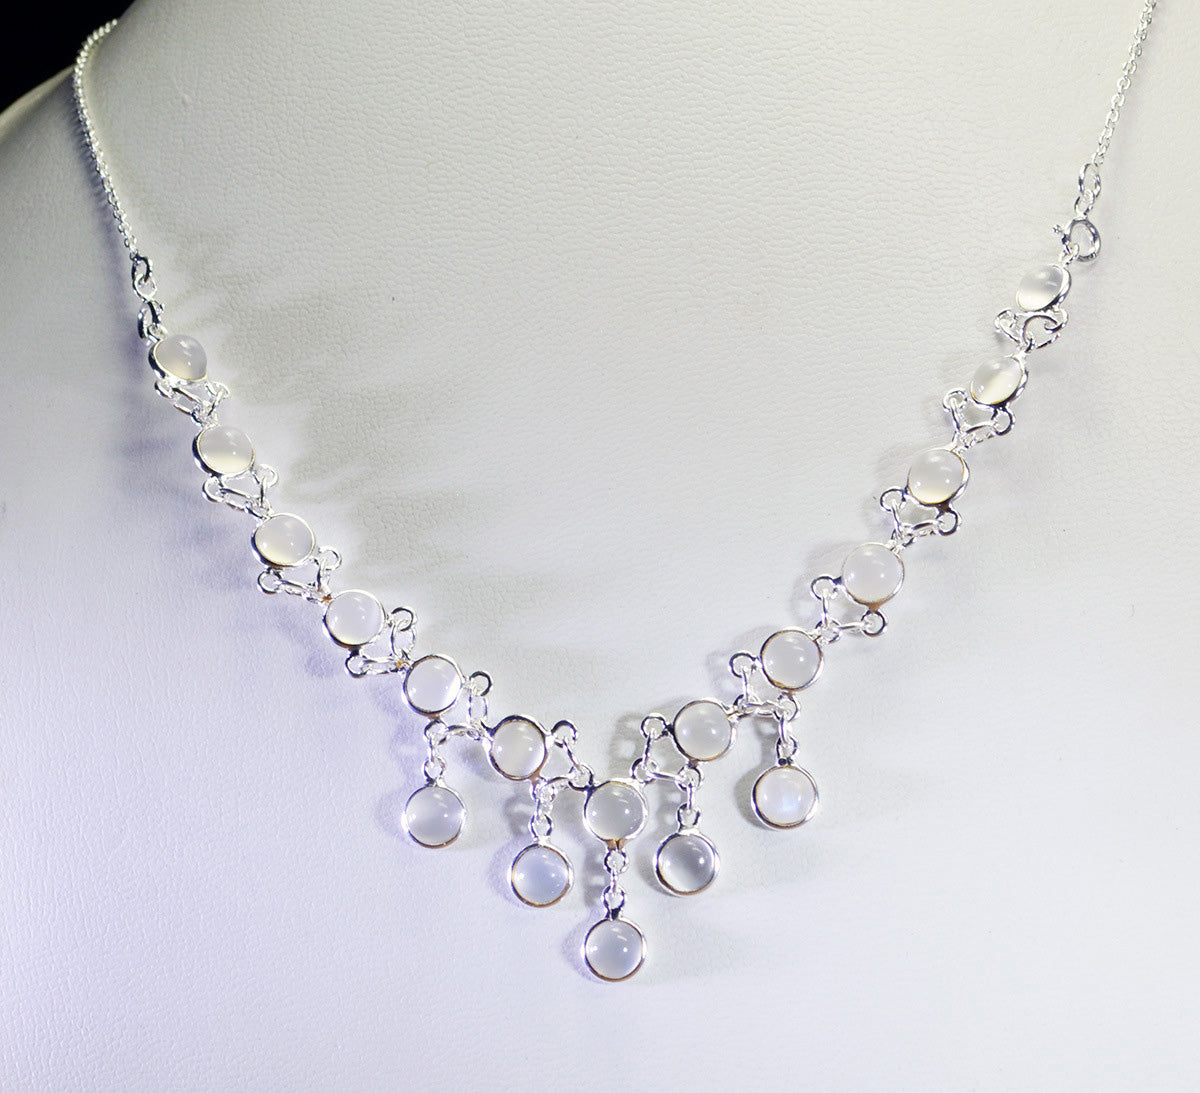 usually 925 Solid Sterling Silver splendid genuine White Necklace gift UK